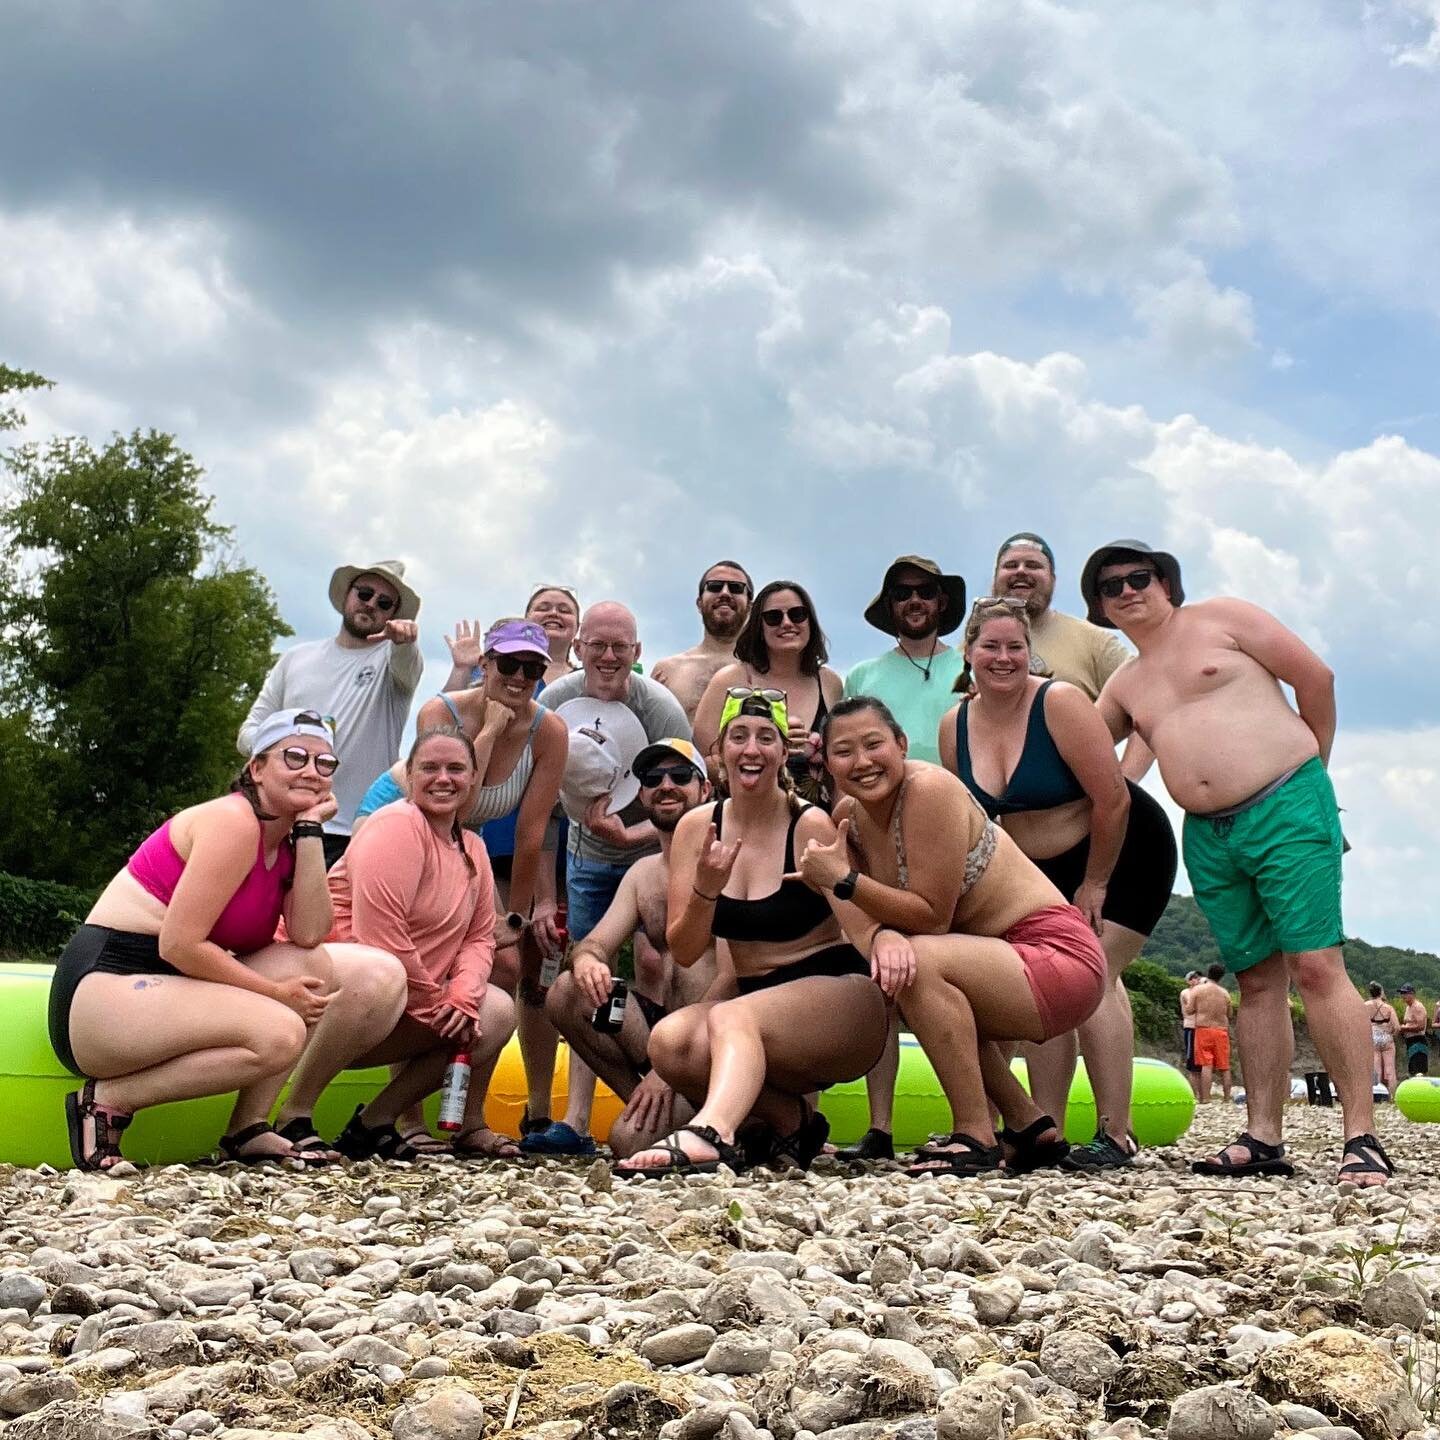 The Root River giveth (someone else&rsquo;s beers) and the Root River taketh away (my sunglasses). Still somehow our smoothest tubing excursion so far!

Cheers to forging traditions in the silliest ways with the silliest people 🍻